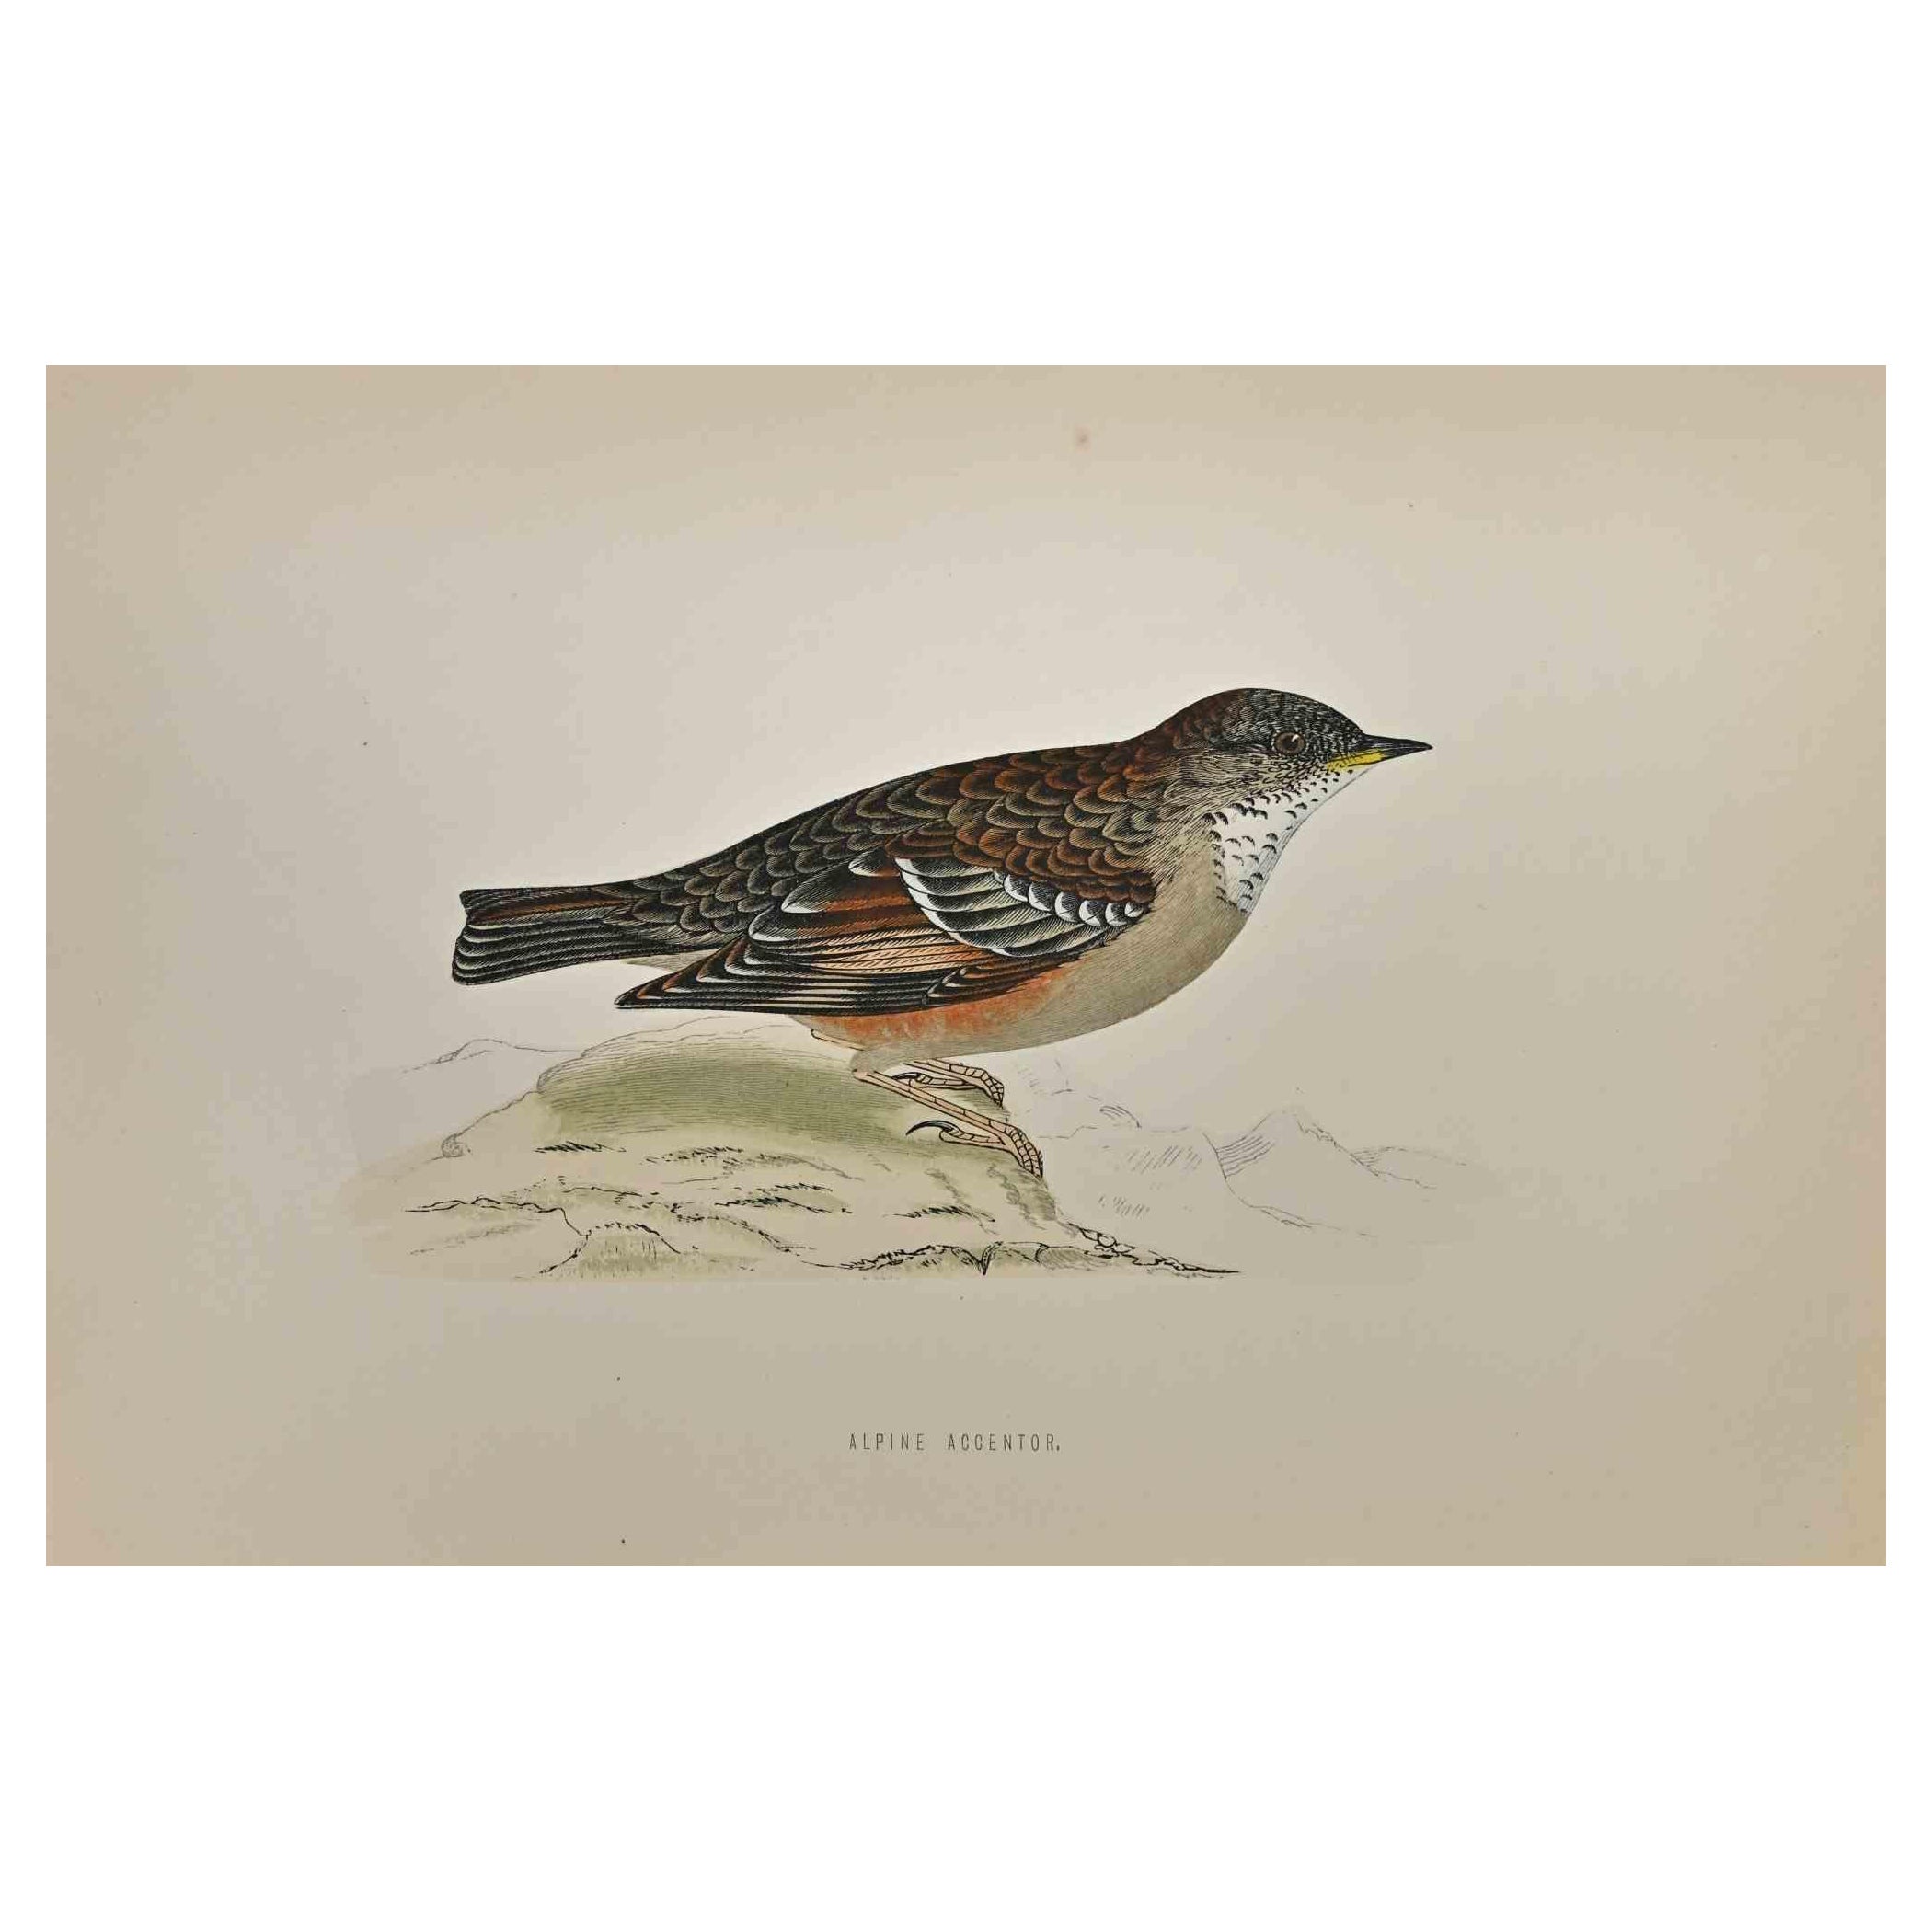  Alpine Accentor is a modern artwork realized in 1870 by the British artist Alexander Francis Lydon (1836-1917) . 

Woodcut print, hand colored, published by London, Bell & Sons, 1870.  Name of the bird printed in plate. This work is part of a print